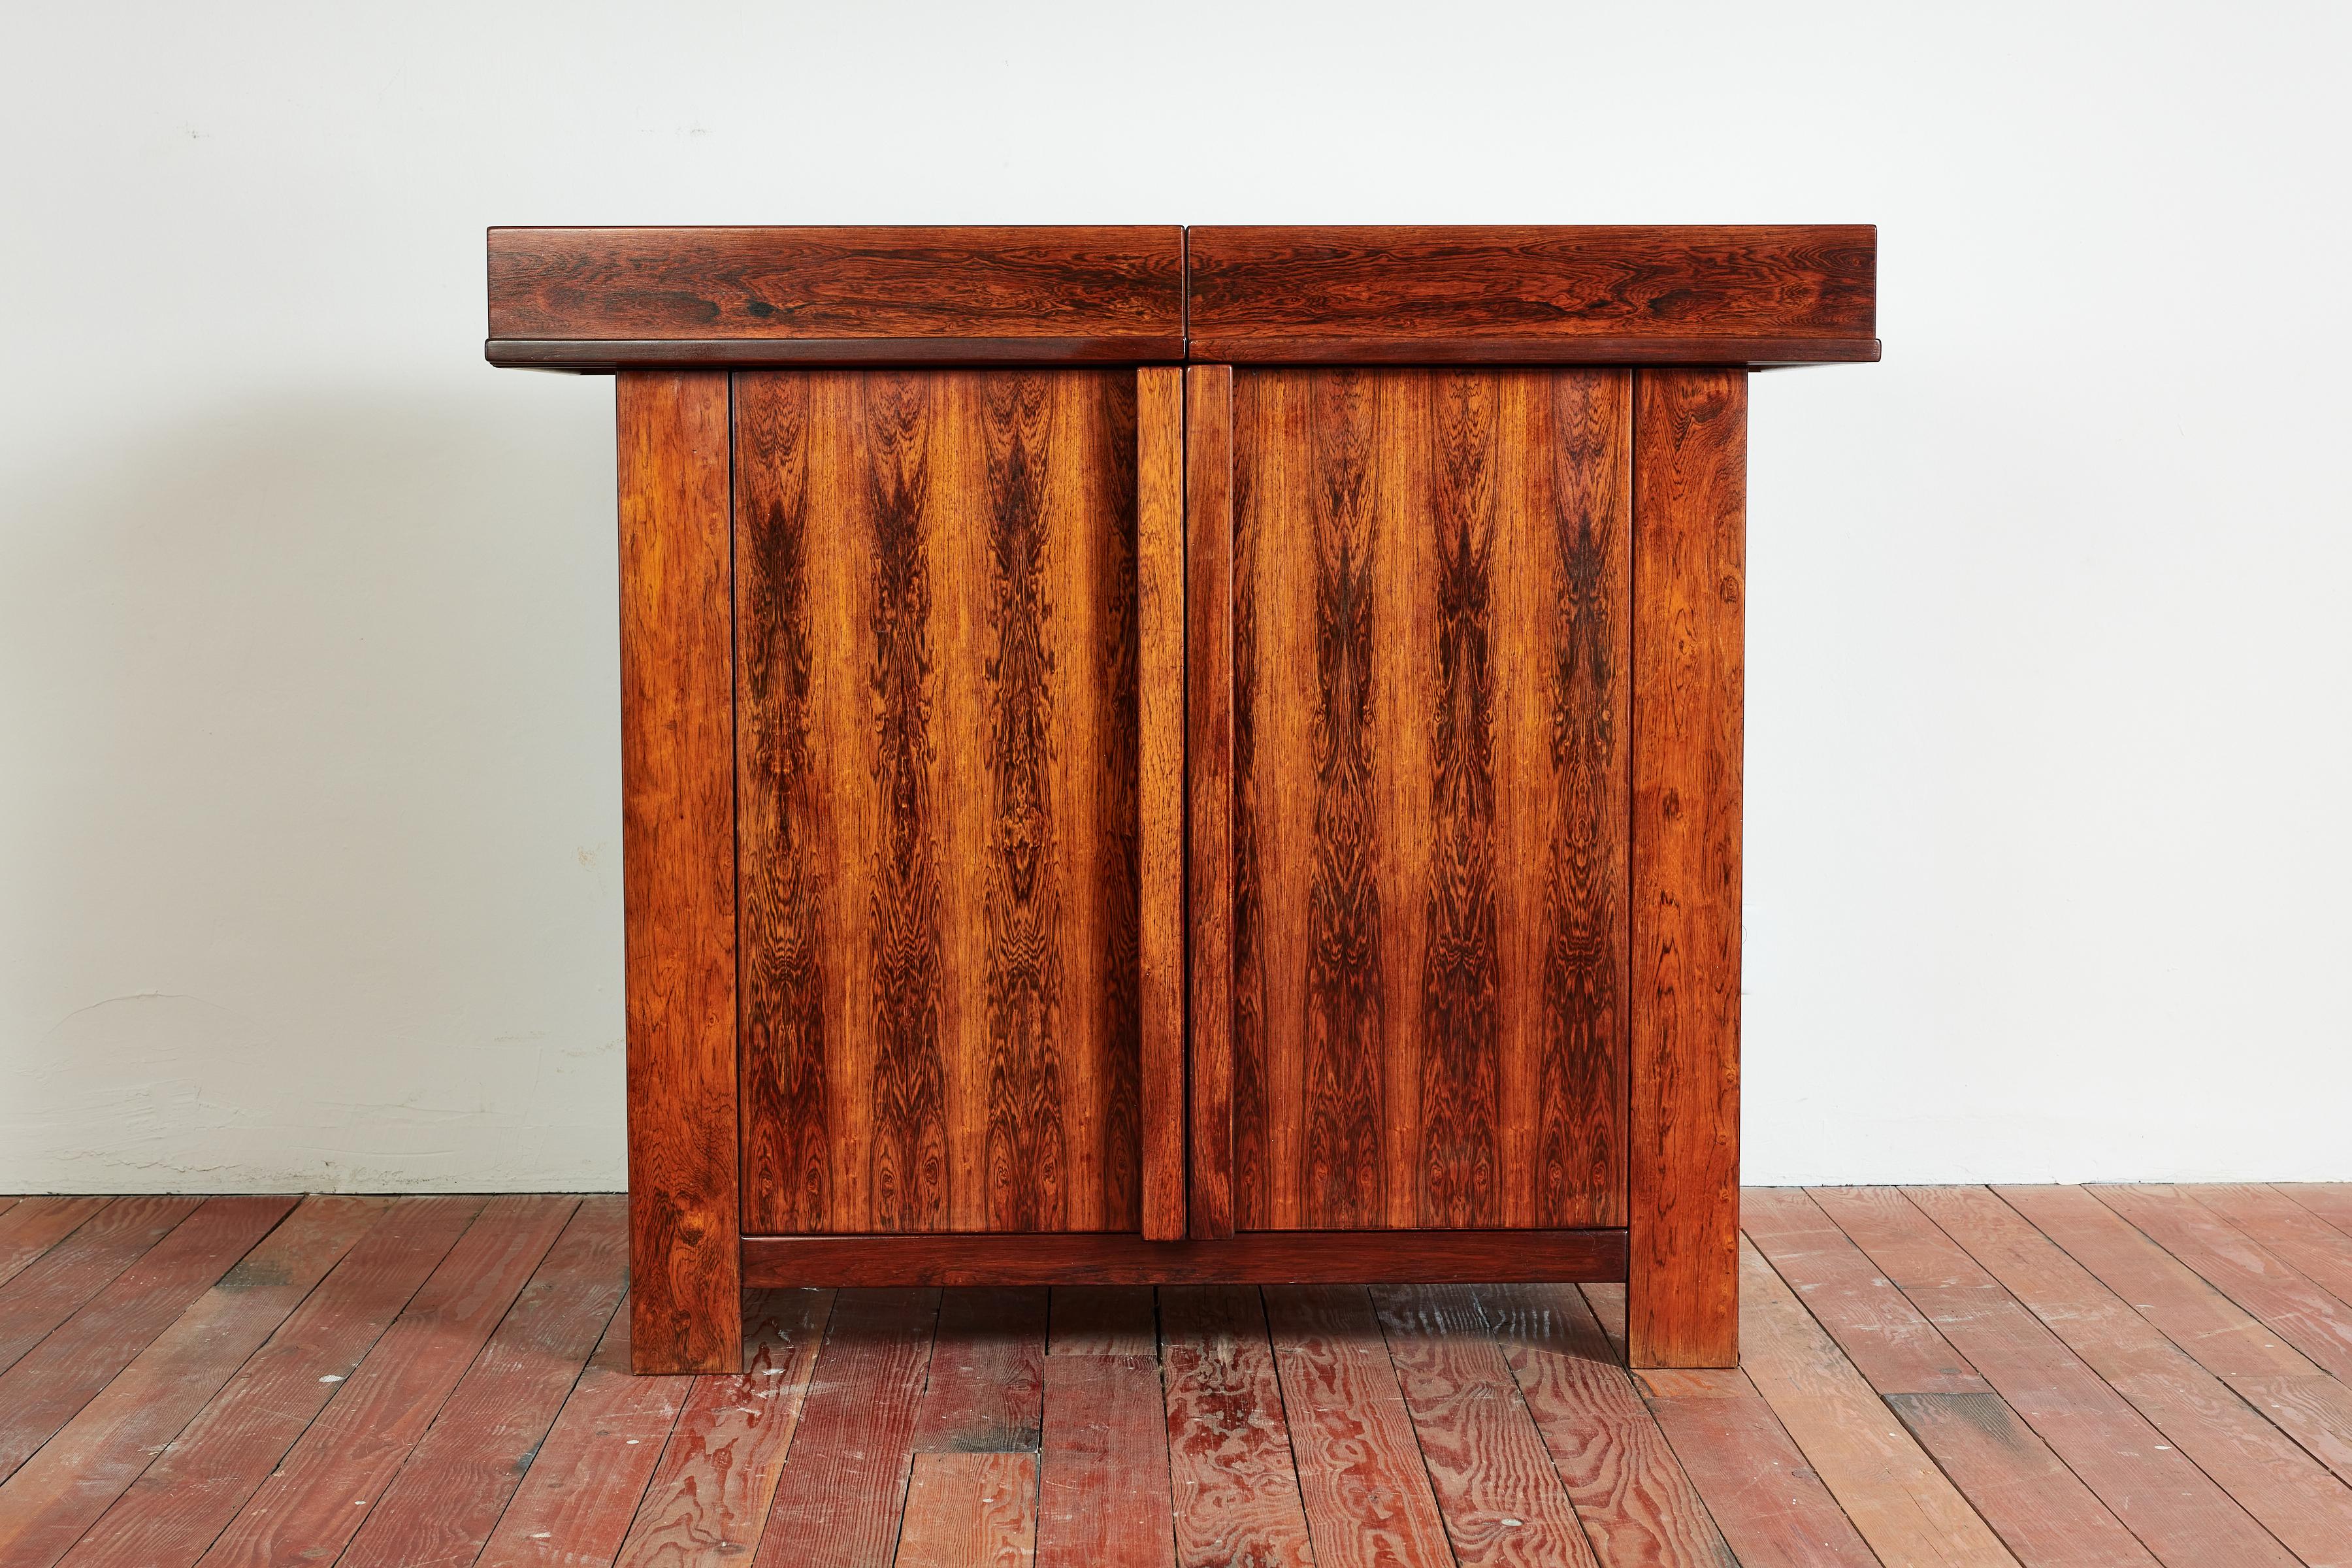 Gorgeous Italian sideboard by Sergio and Giorgio Saporiti, circa 1960s
Unique shape and function - top tiers open up to reveal storage. 
2 Door cabinet with shelving. 
Jacaranda wood with incredible contrasting grain.
 